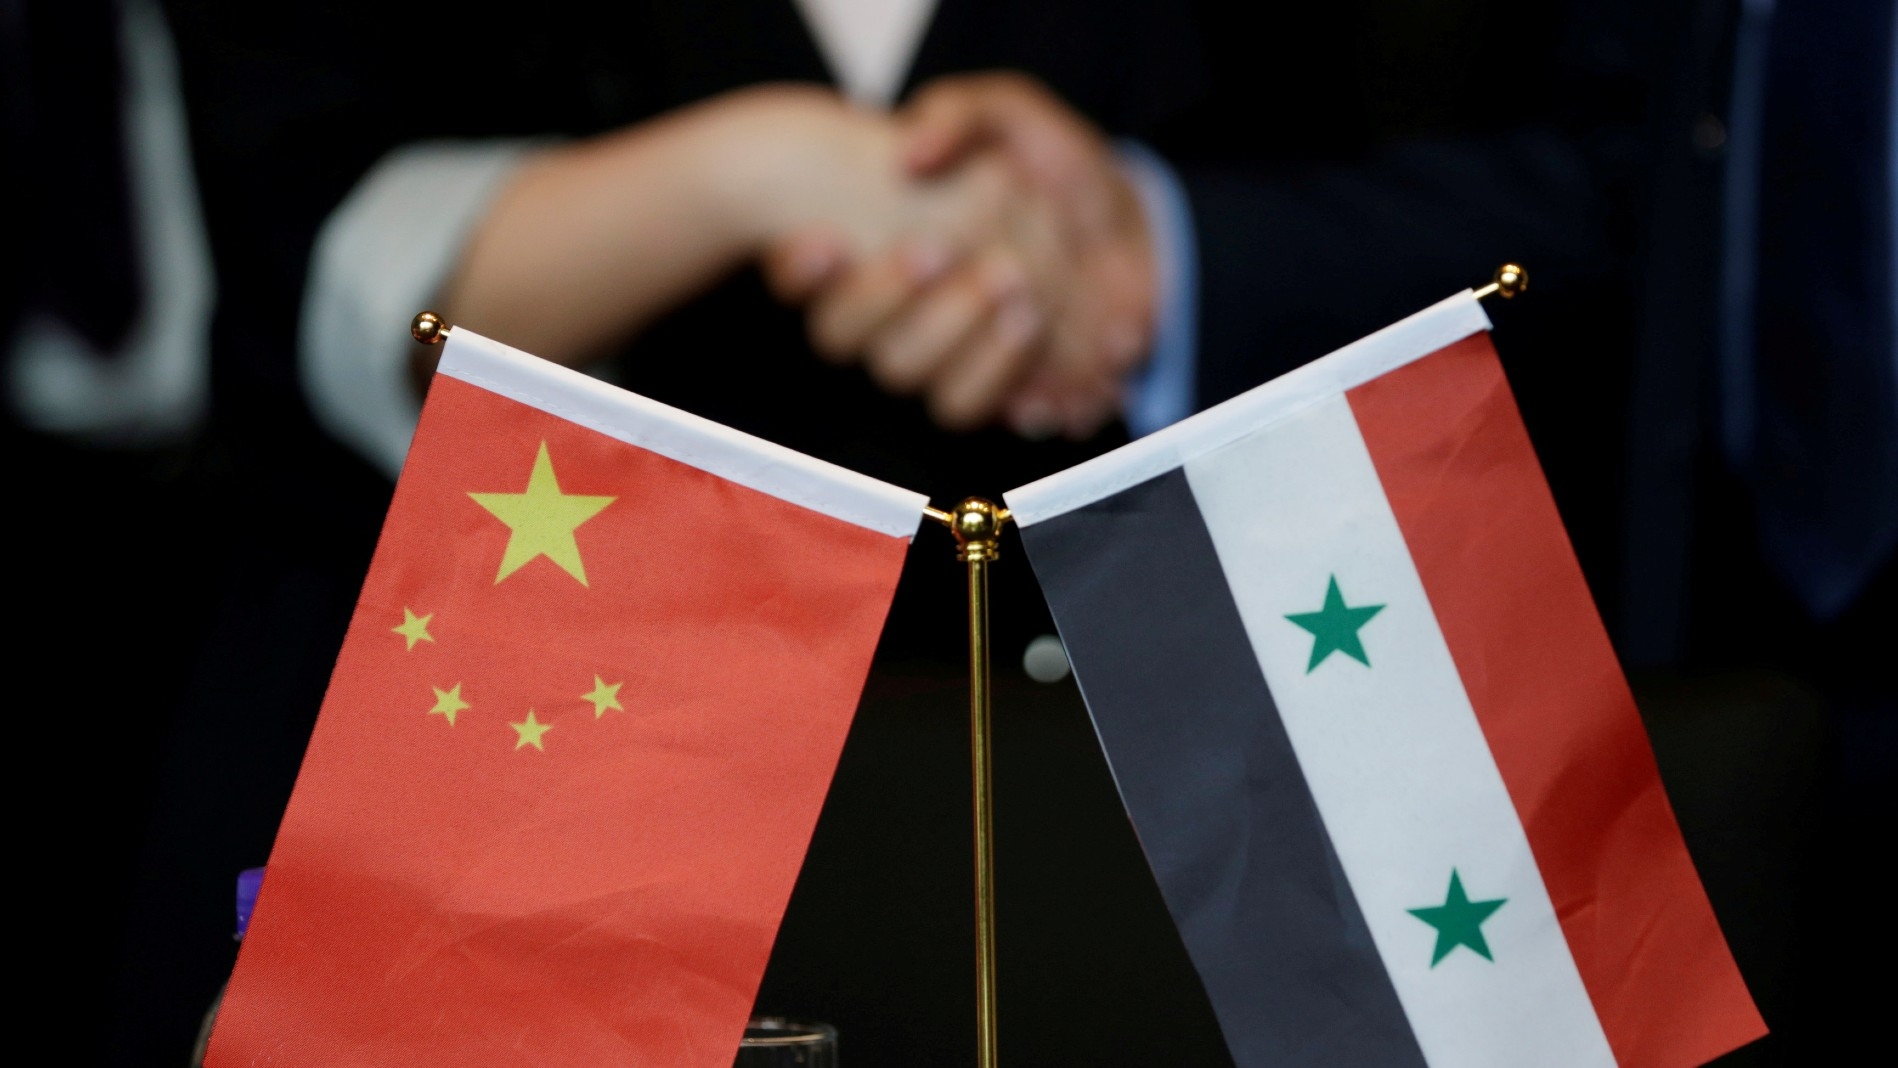 Chinese and Syrian businessmen shake hands behind their national flags during a meeting to discuss reconstruction projects in Syria, Beijing, China on 8 May, 2017 (Reuters)